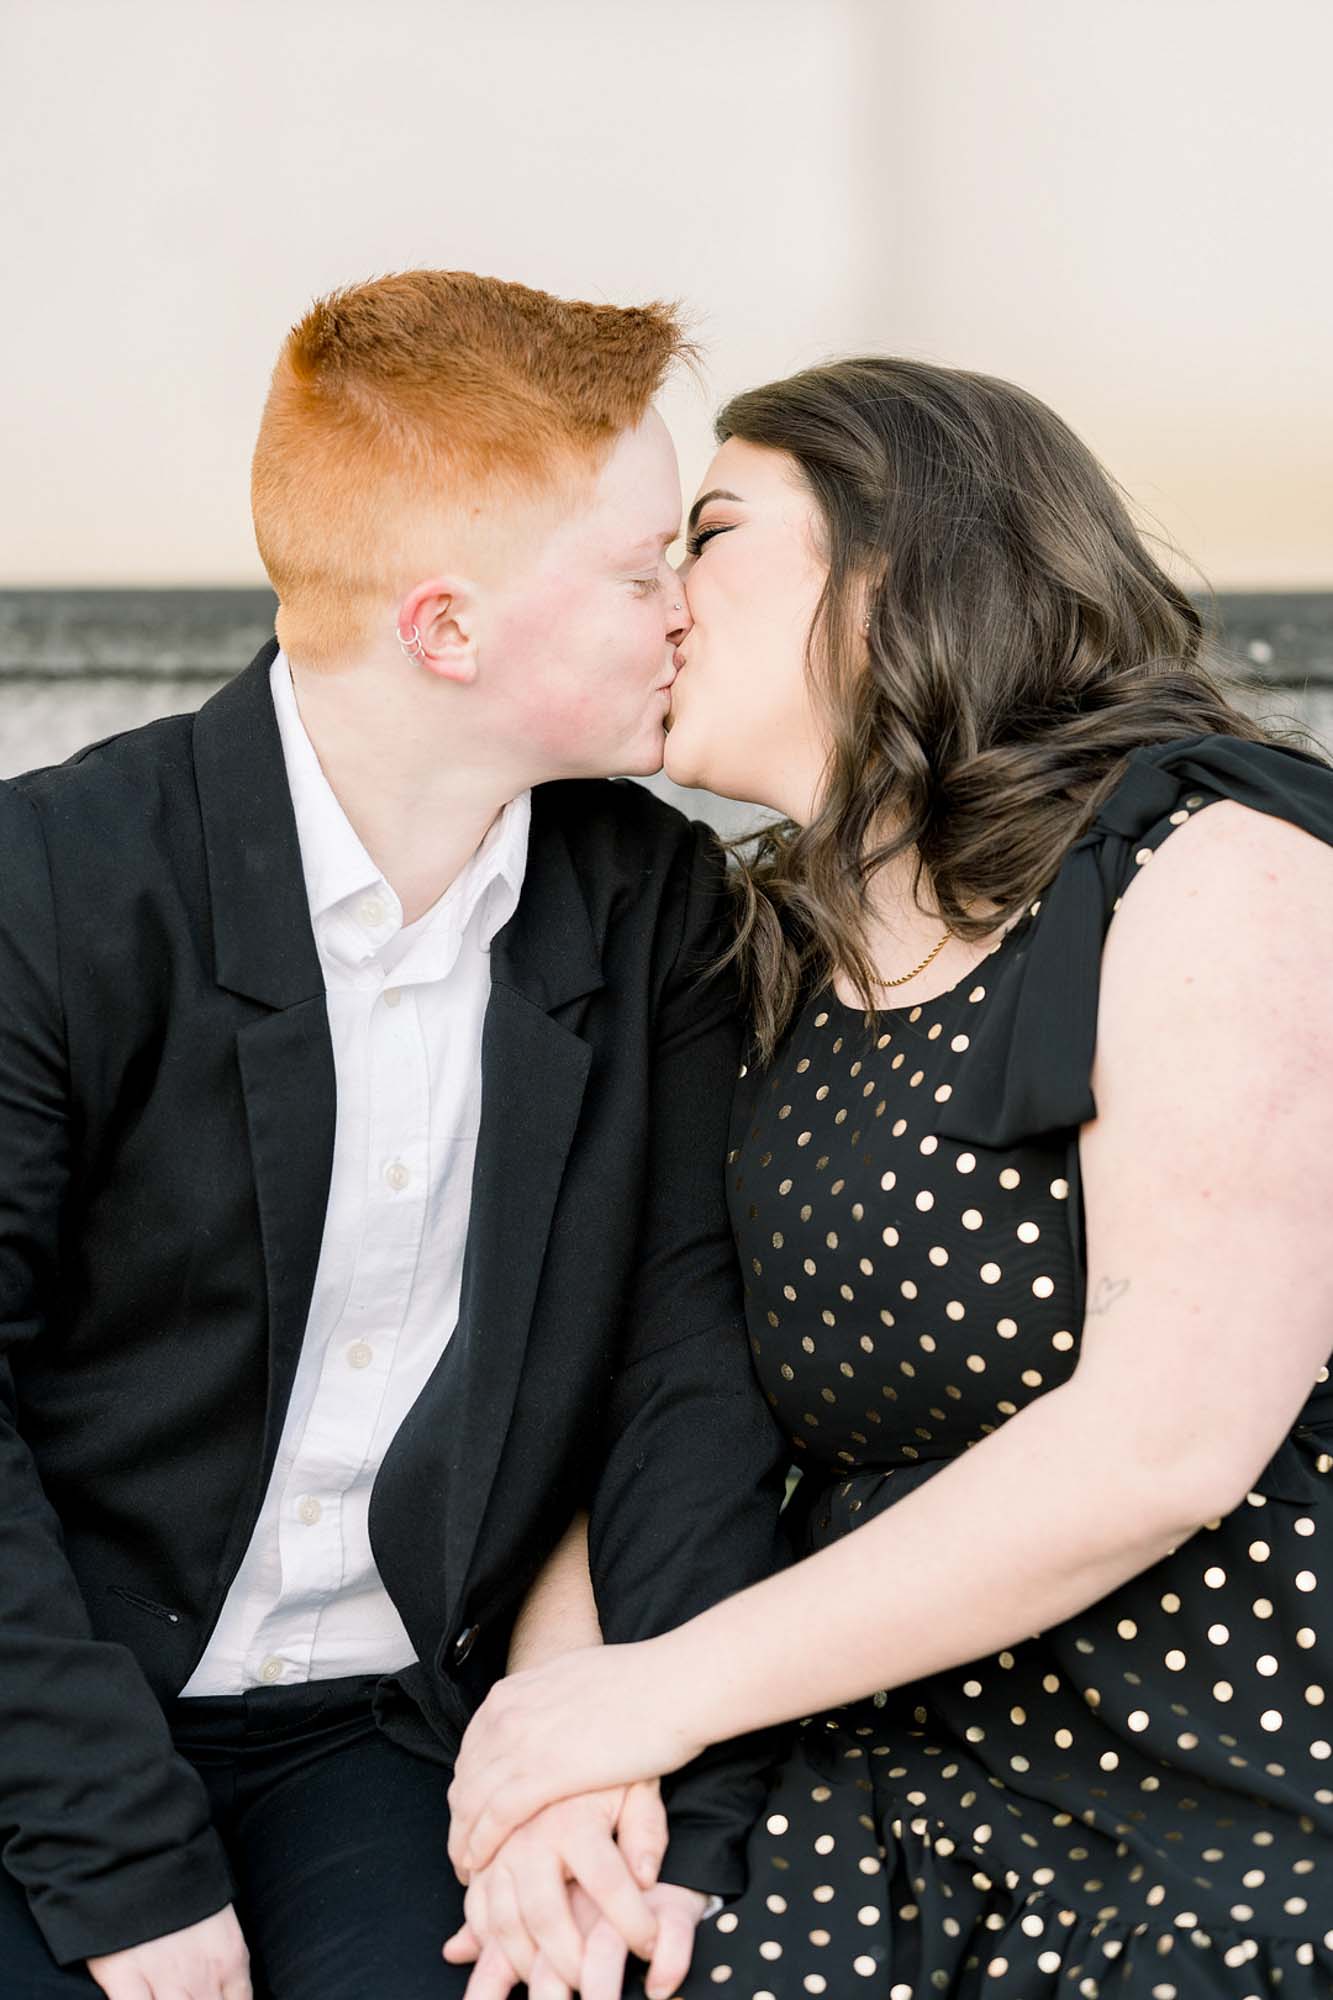 Bright and sunny sweetheart photo session at the Pennsylvania State Capitol | Sarandon Smith Photography | Featured on Equally Wed, the leading LGBTQ+ wedding magazine